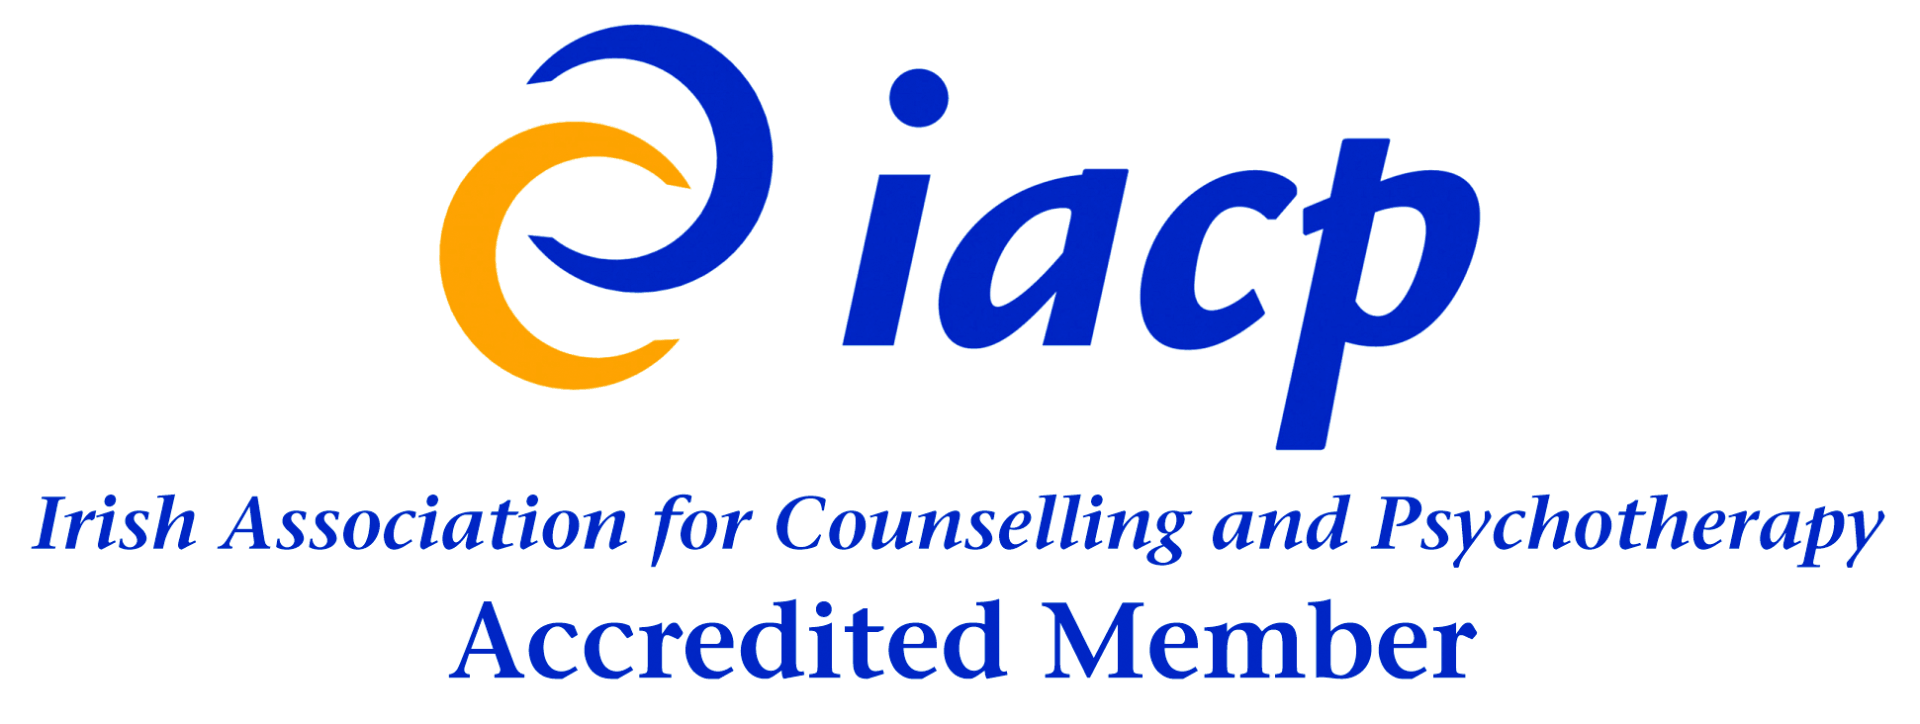 Irish Association of Counselling and Psychotherapy